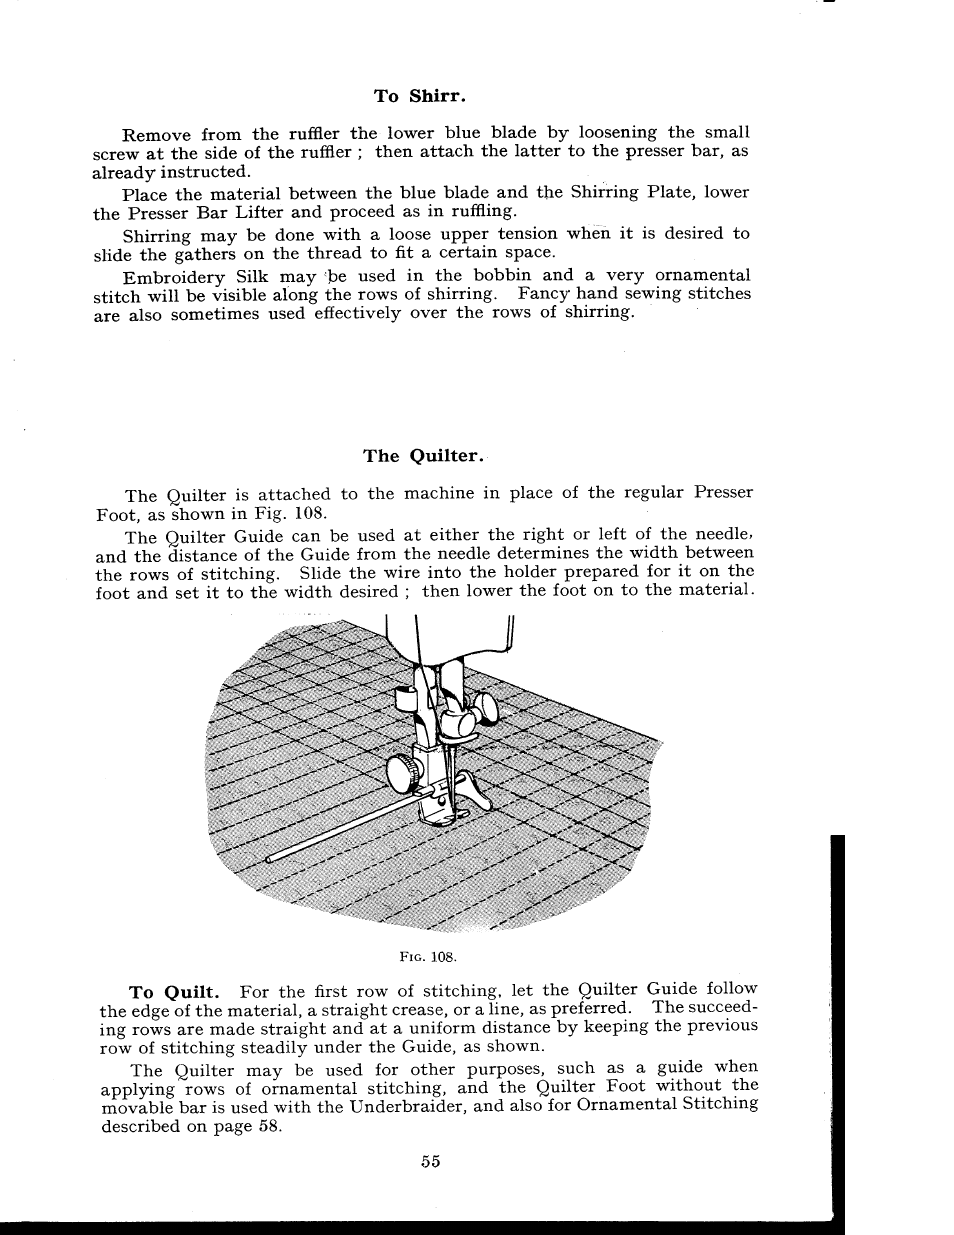 To shirr, The quilter | SINGER 404K User Manual | Page 55 / 78